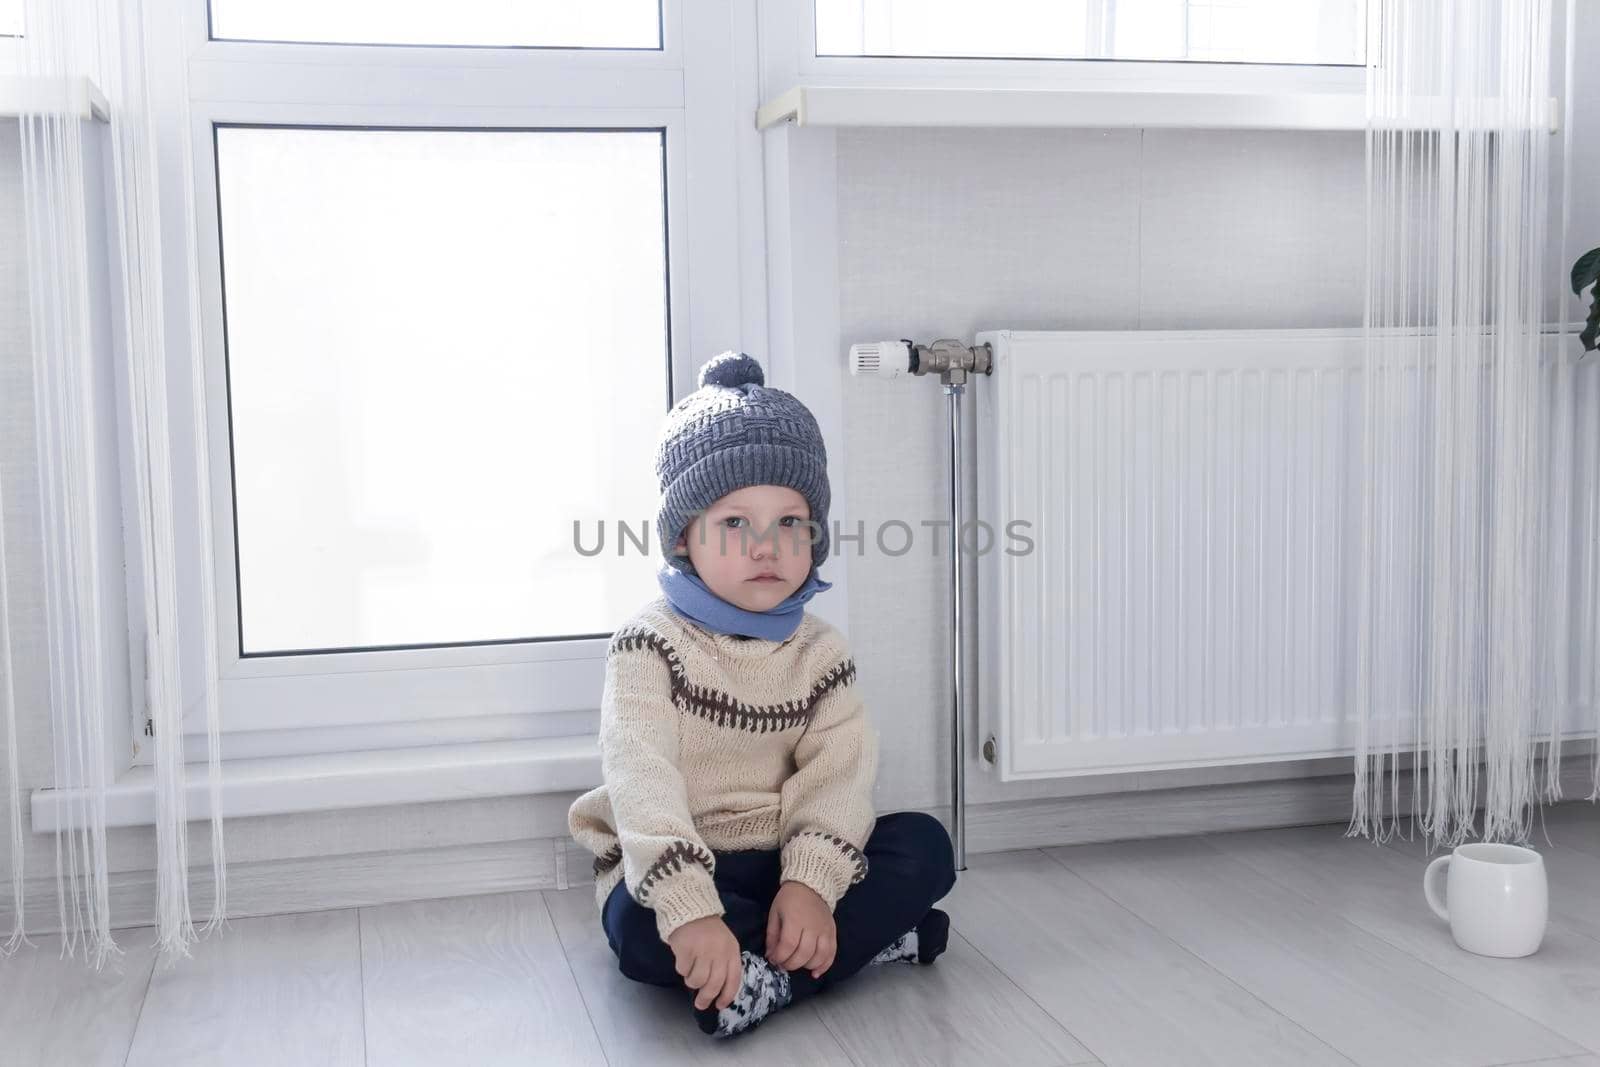 A small child in a sweater and a gray hat is kneeling near a heater with a thermostat...